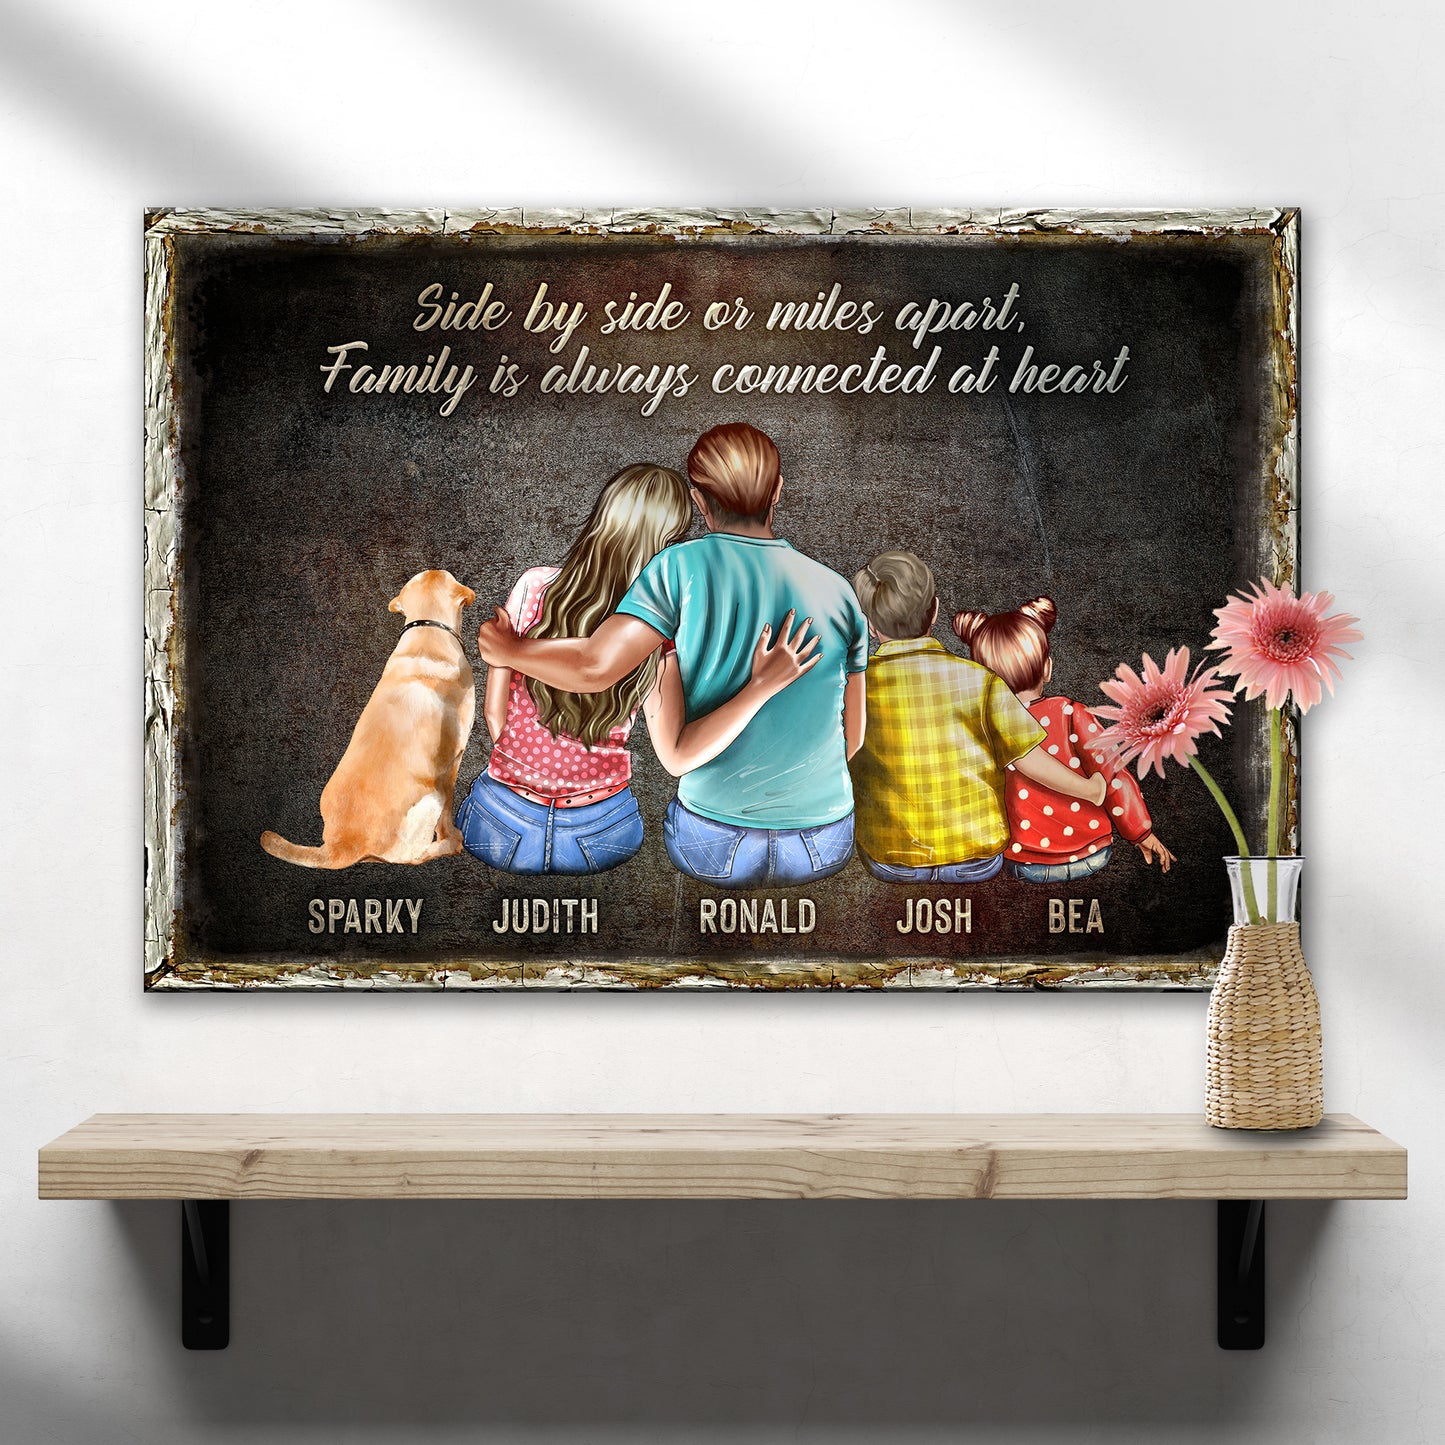 Family Is Always Connected At Heart Sign - Image by Tailored Canvases